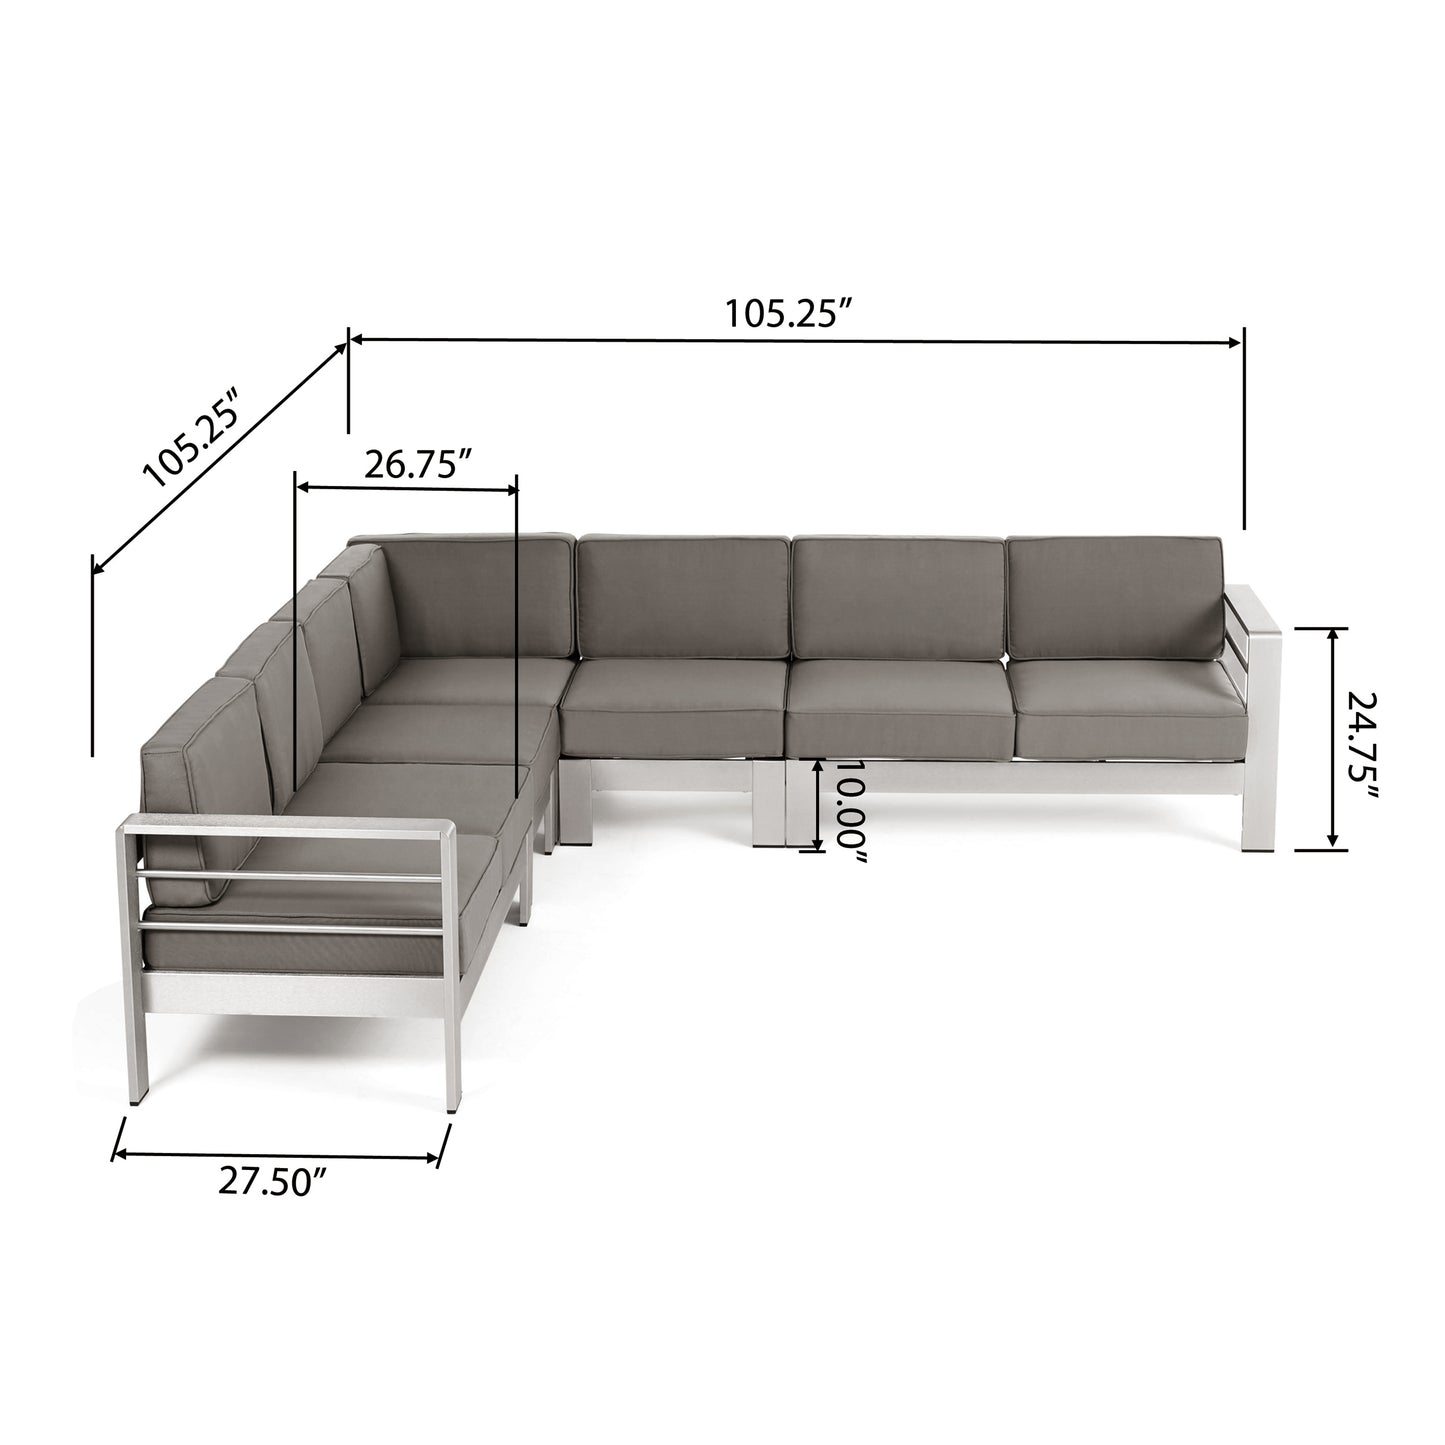 Emily Coral Outdoor 7-Seater Aluminum Sectional Sofa Set, Silver and Khaki